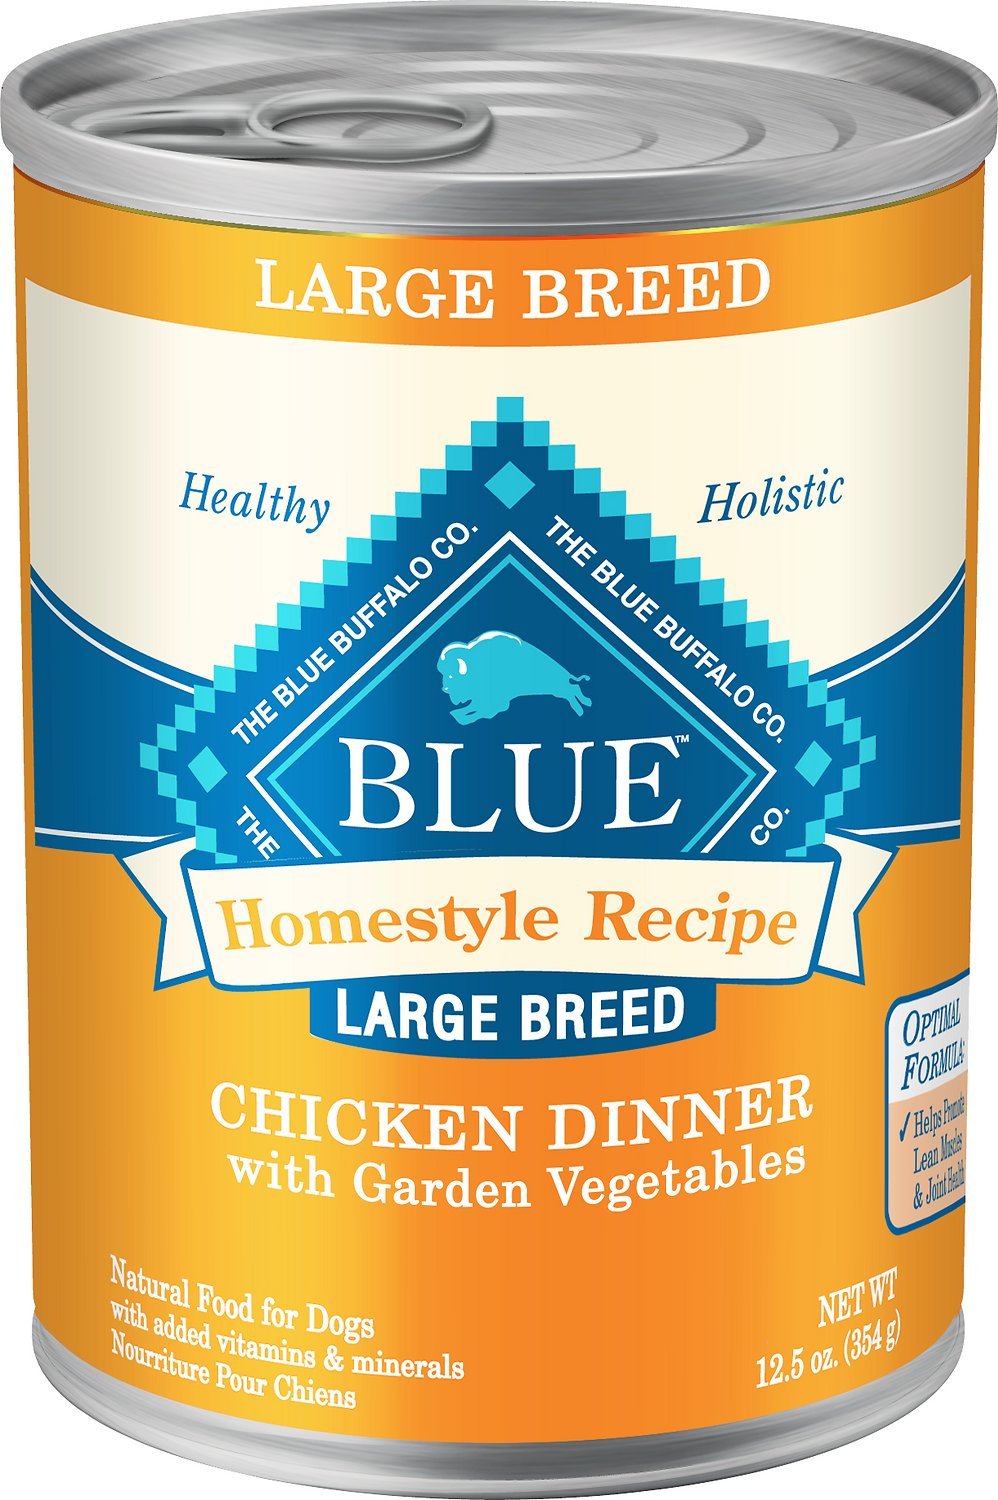 Homemade Recipe Blue Buffalo Chicken Dinner for Large Breed Dogs